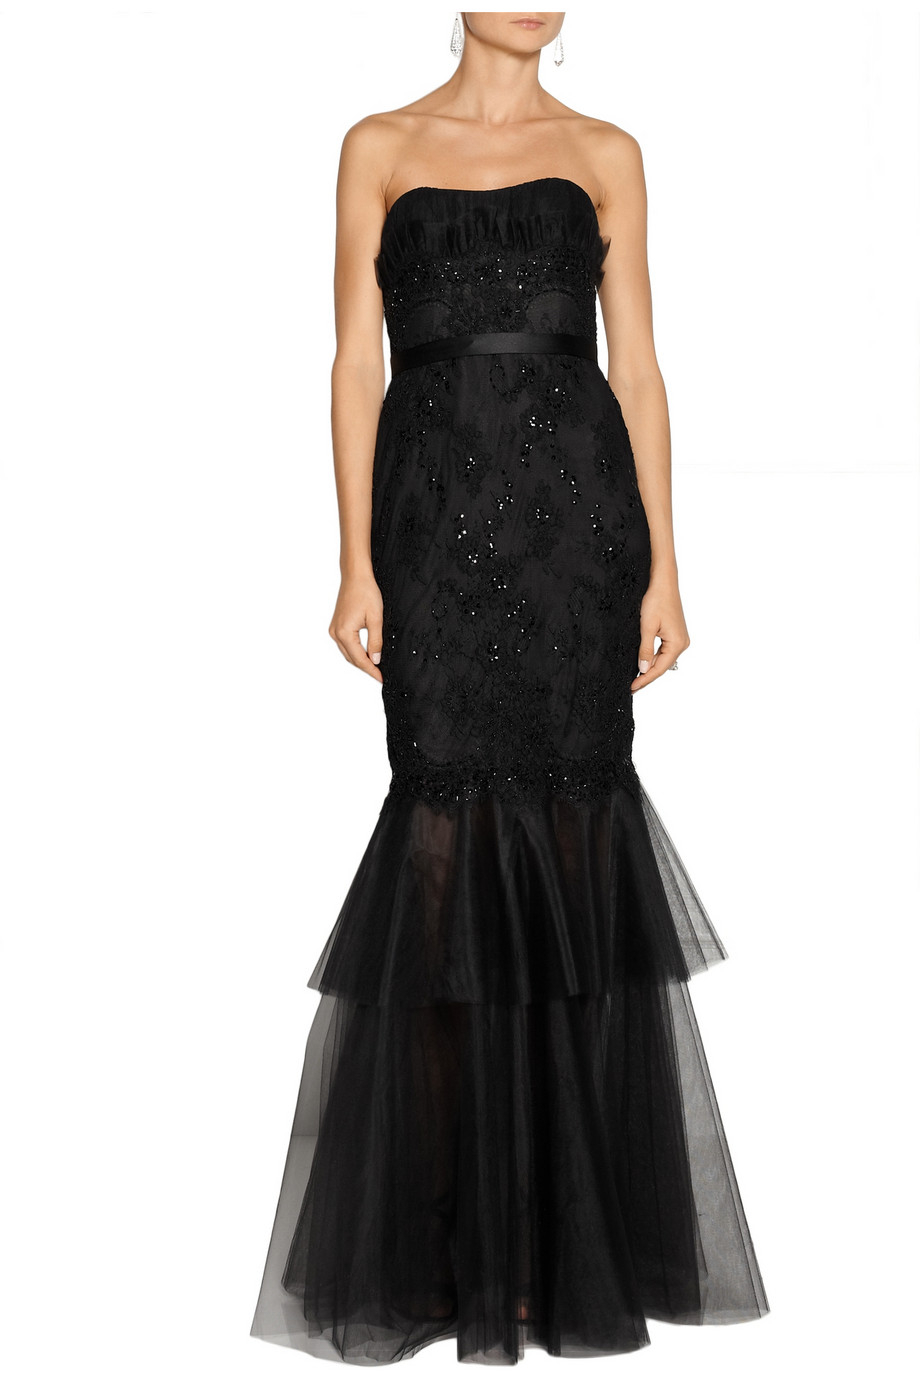 Notte by marchesa Embellished Lace and Tulle Gown in Black | Lyst